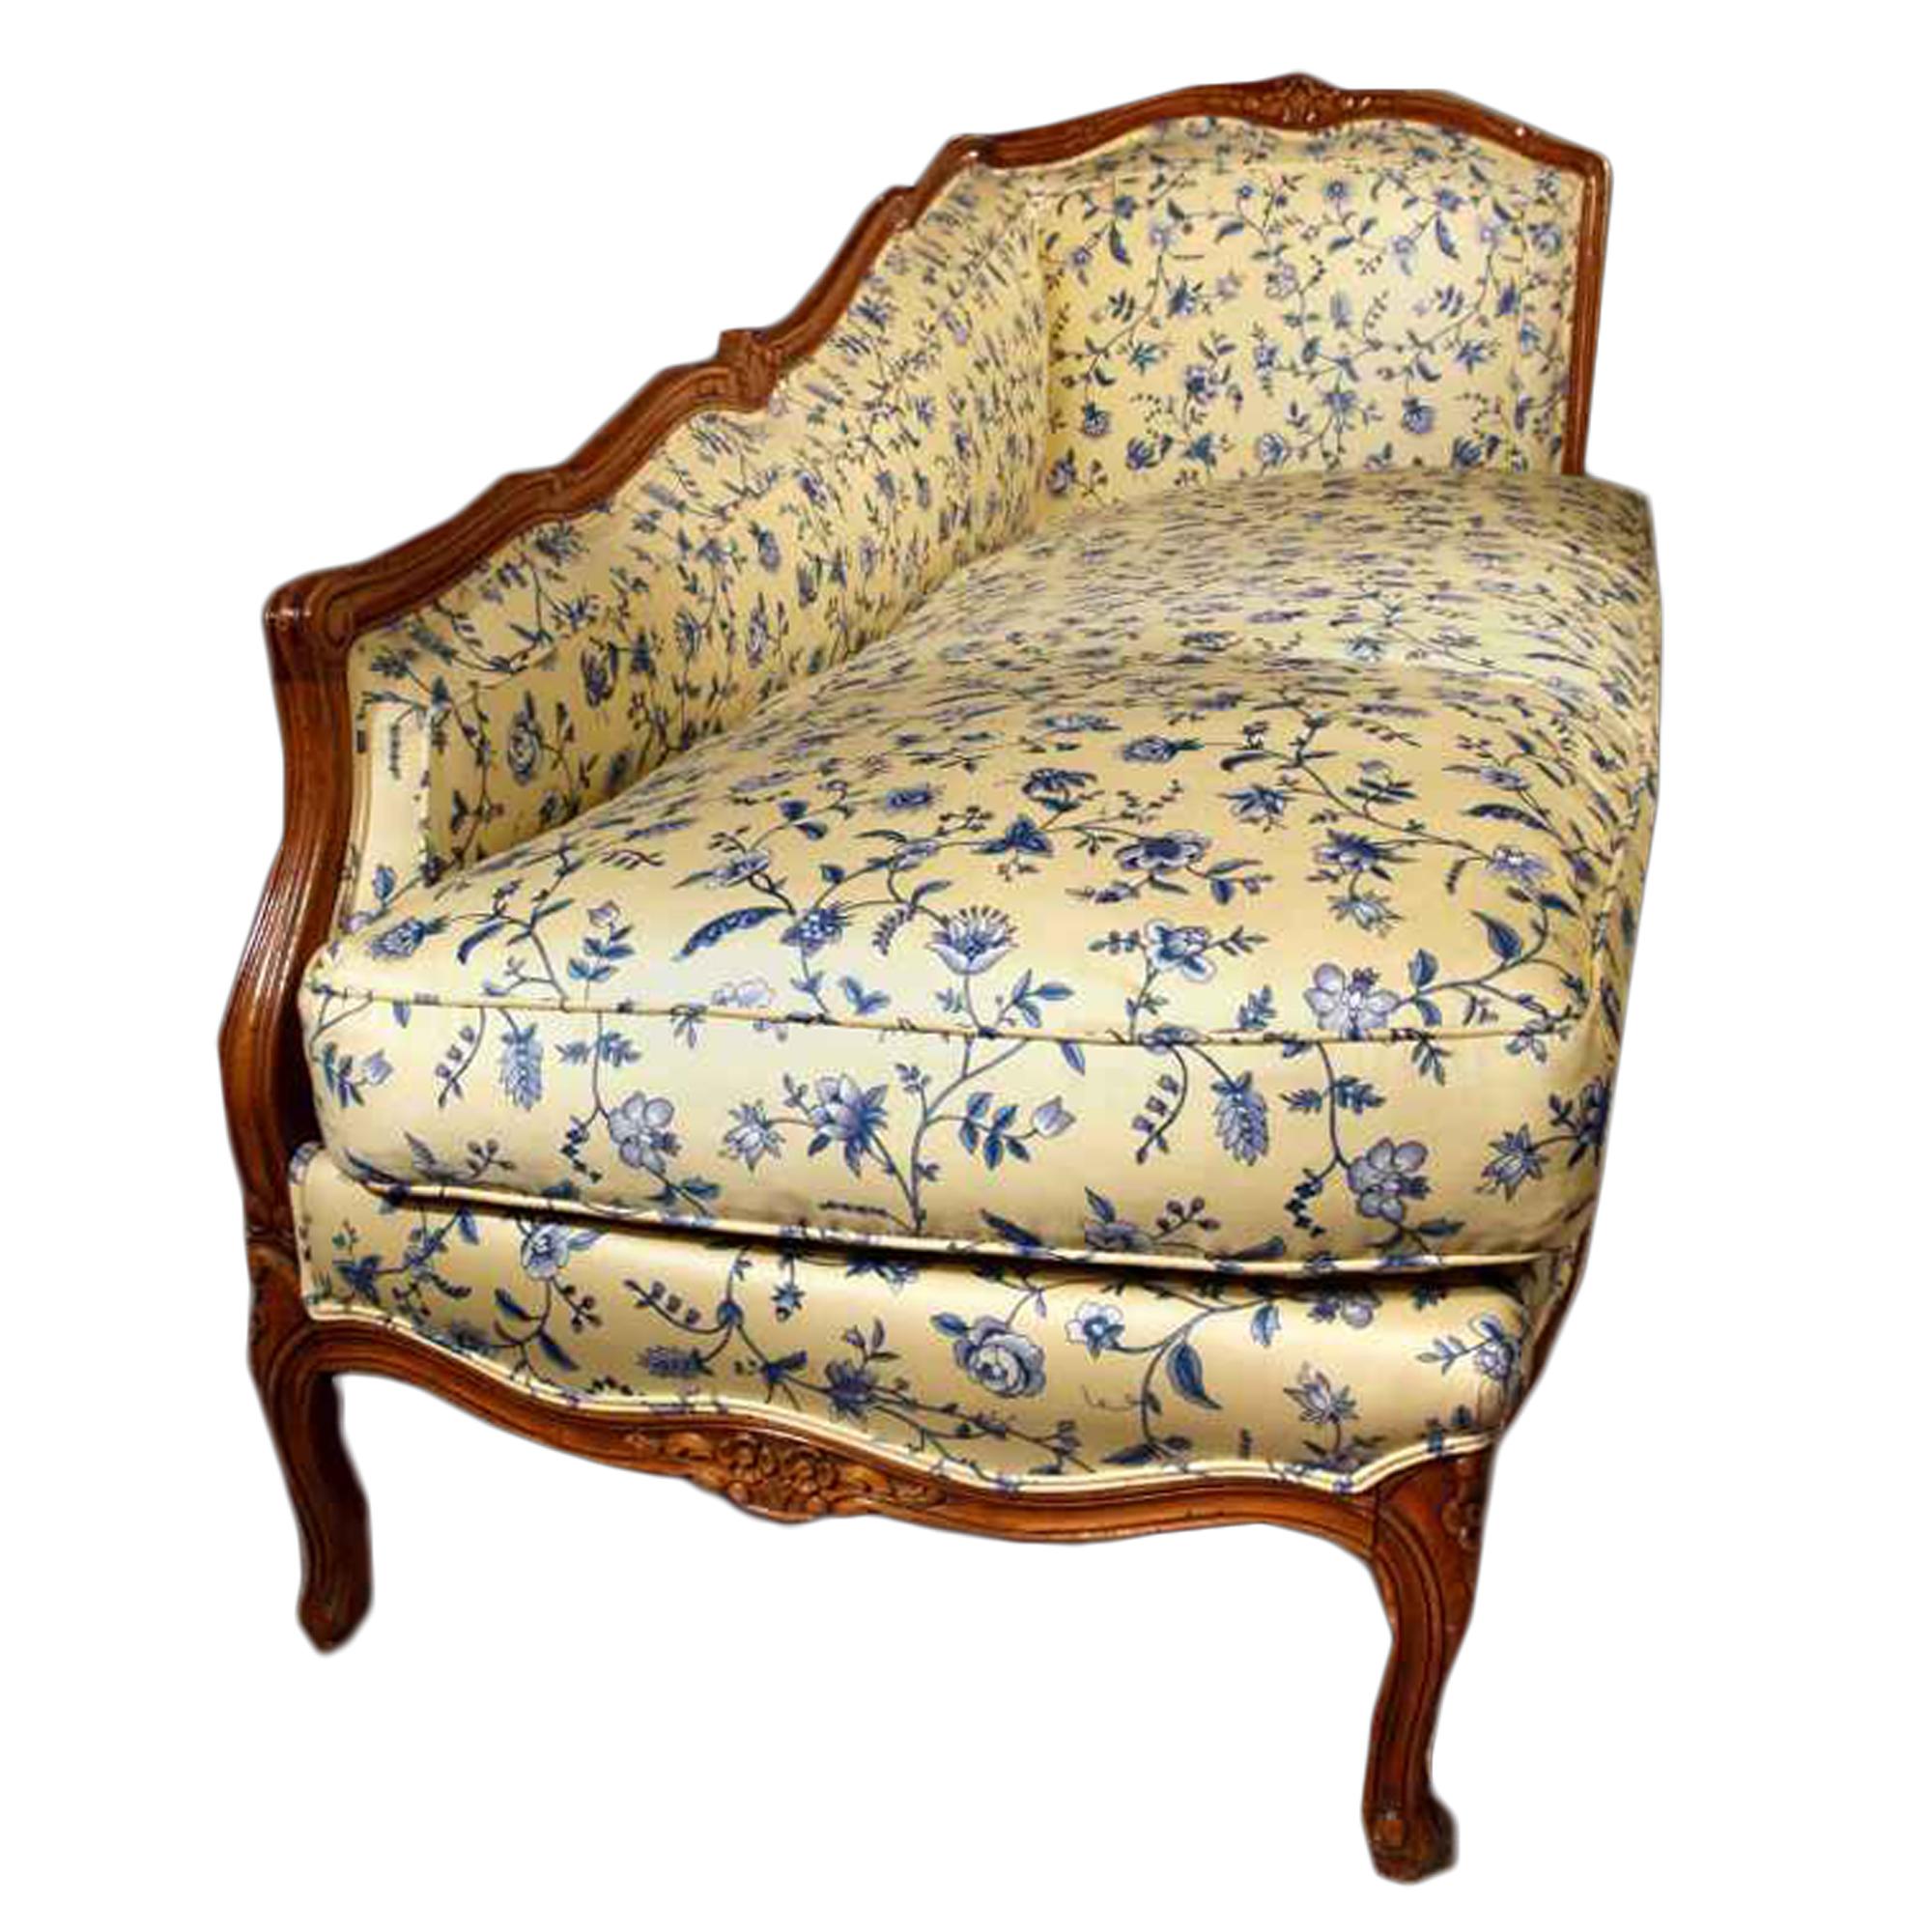 An elegant and unusual country French late 19th century Louis XVI style honey colored oak lounge chair. Upholstered on all sides with a handsome blue and yellow fabric. Raised on six 's' scrolled supports, the lounge chair has a scalloped moulded